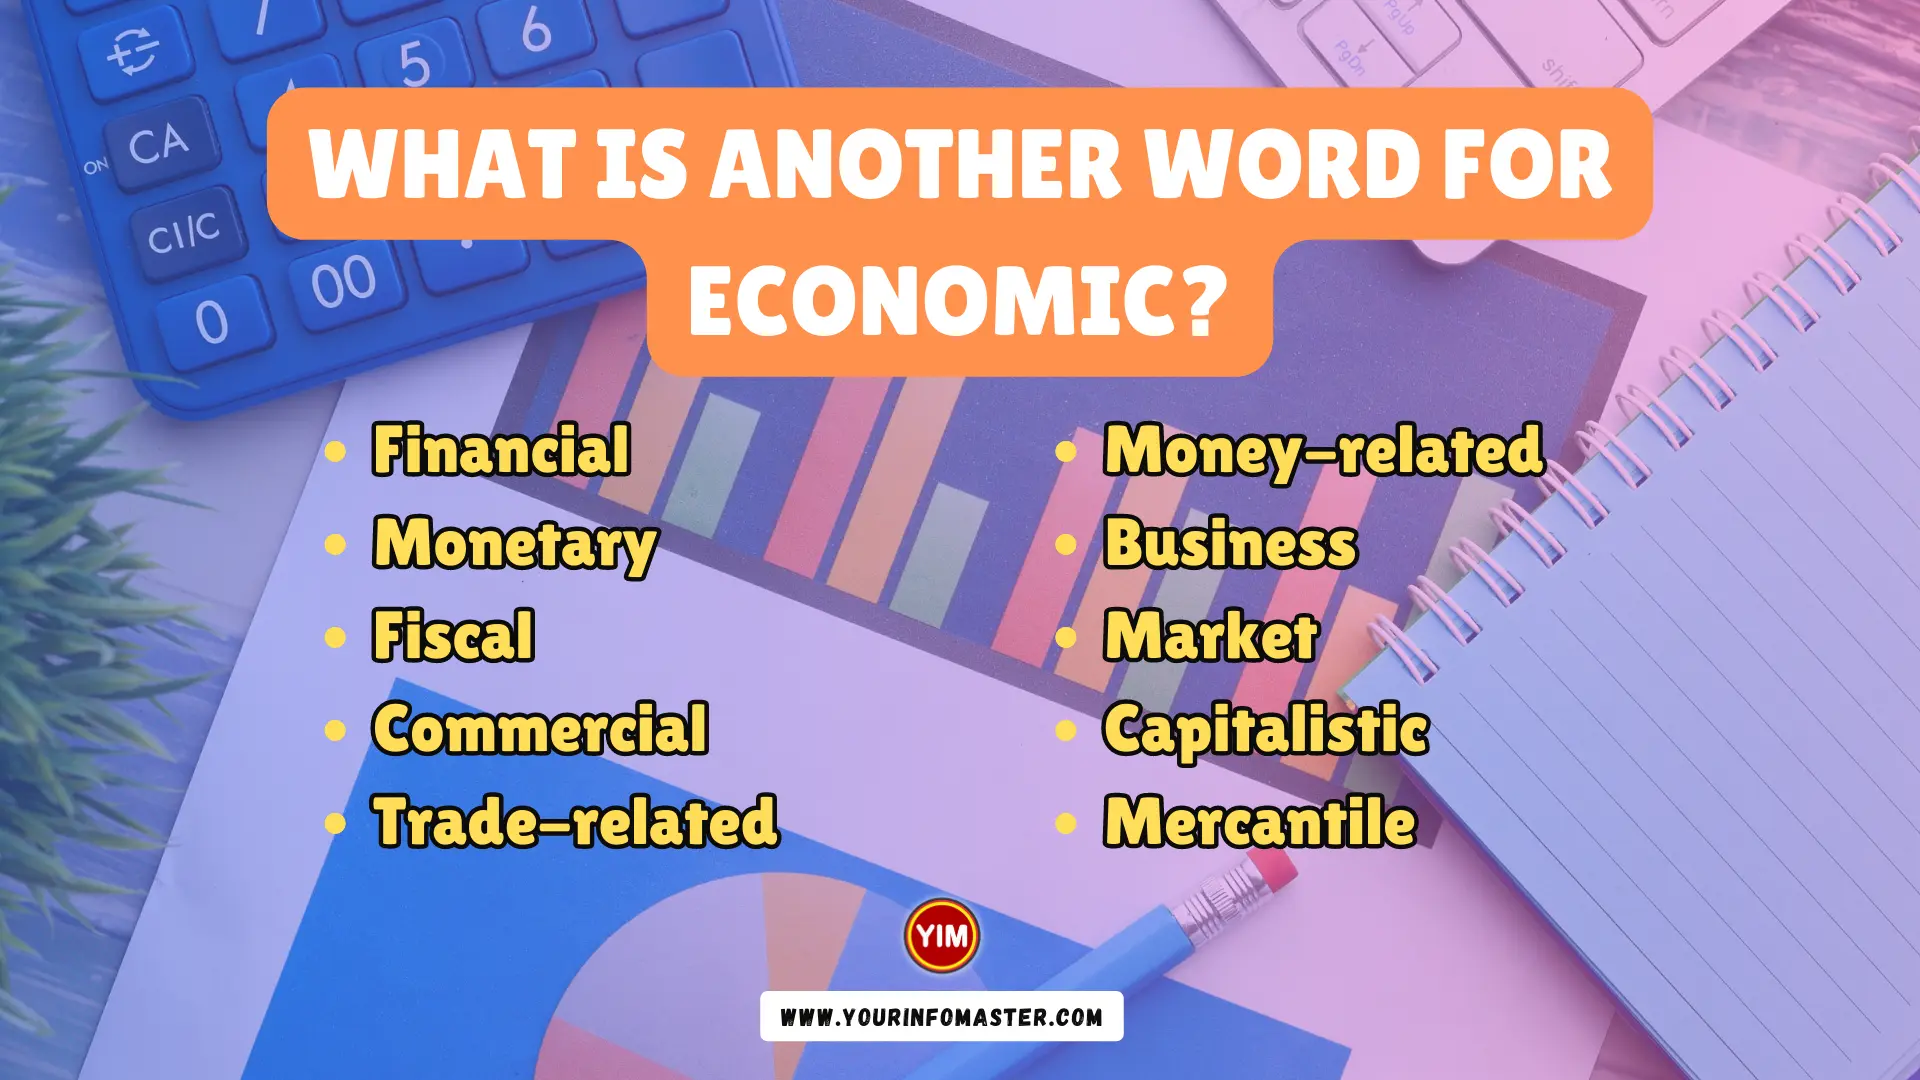 What is another word for Economic